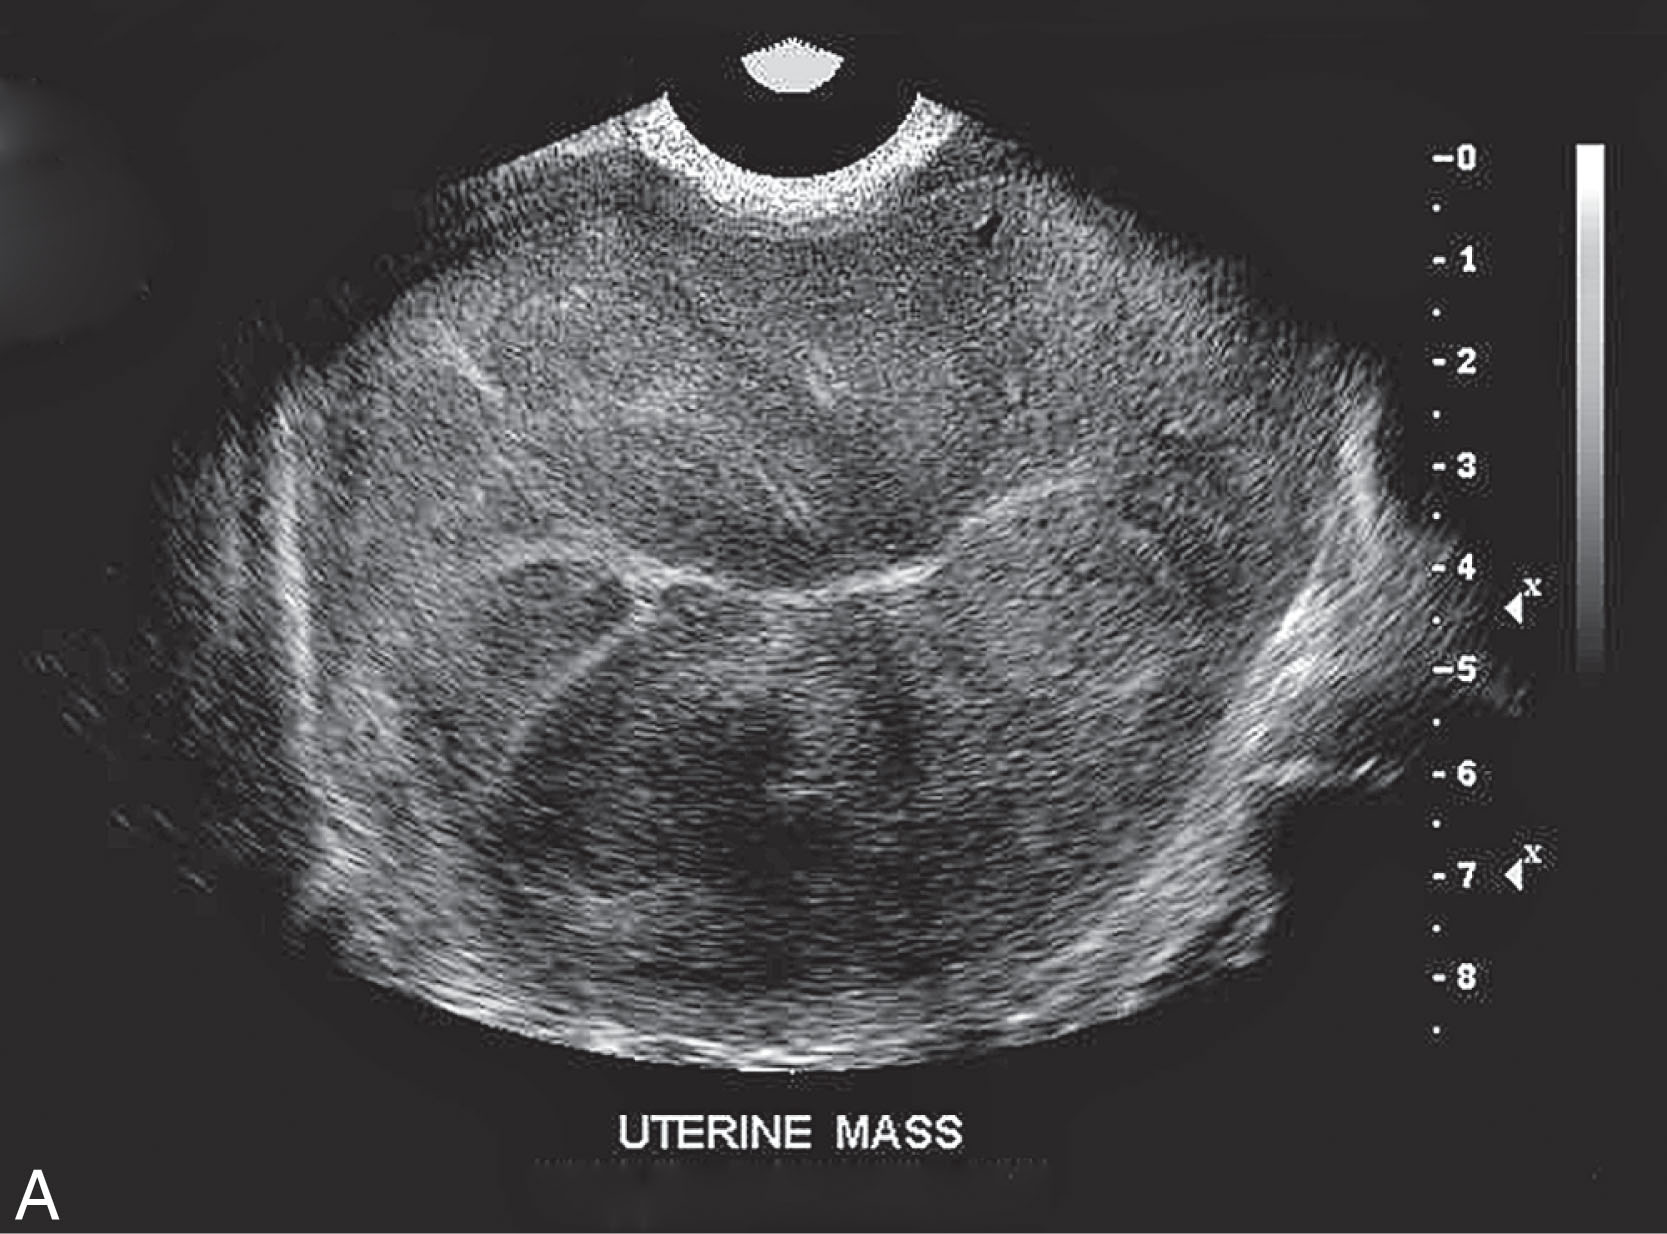 Fig. 7.2, (A) The typically grainy appearance of this ultrasound image is not primarily the result of detail resolution limitations but rather of speckle. Speckle is the interference pattern resulting from constructive and destructive interference of echoes returning simultaneously from many scatterers within the propagating ultrasound pulse at any instant. (B) Approaches to speckle reduction ( right image compared with the left ) are implemented in modern instruments.